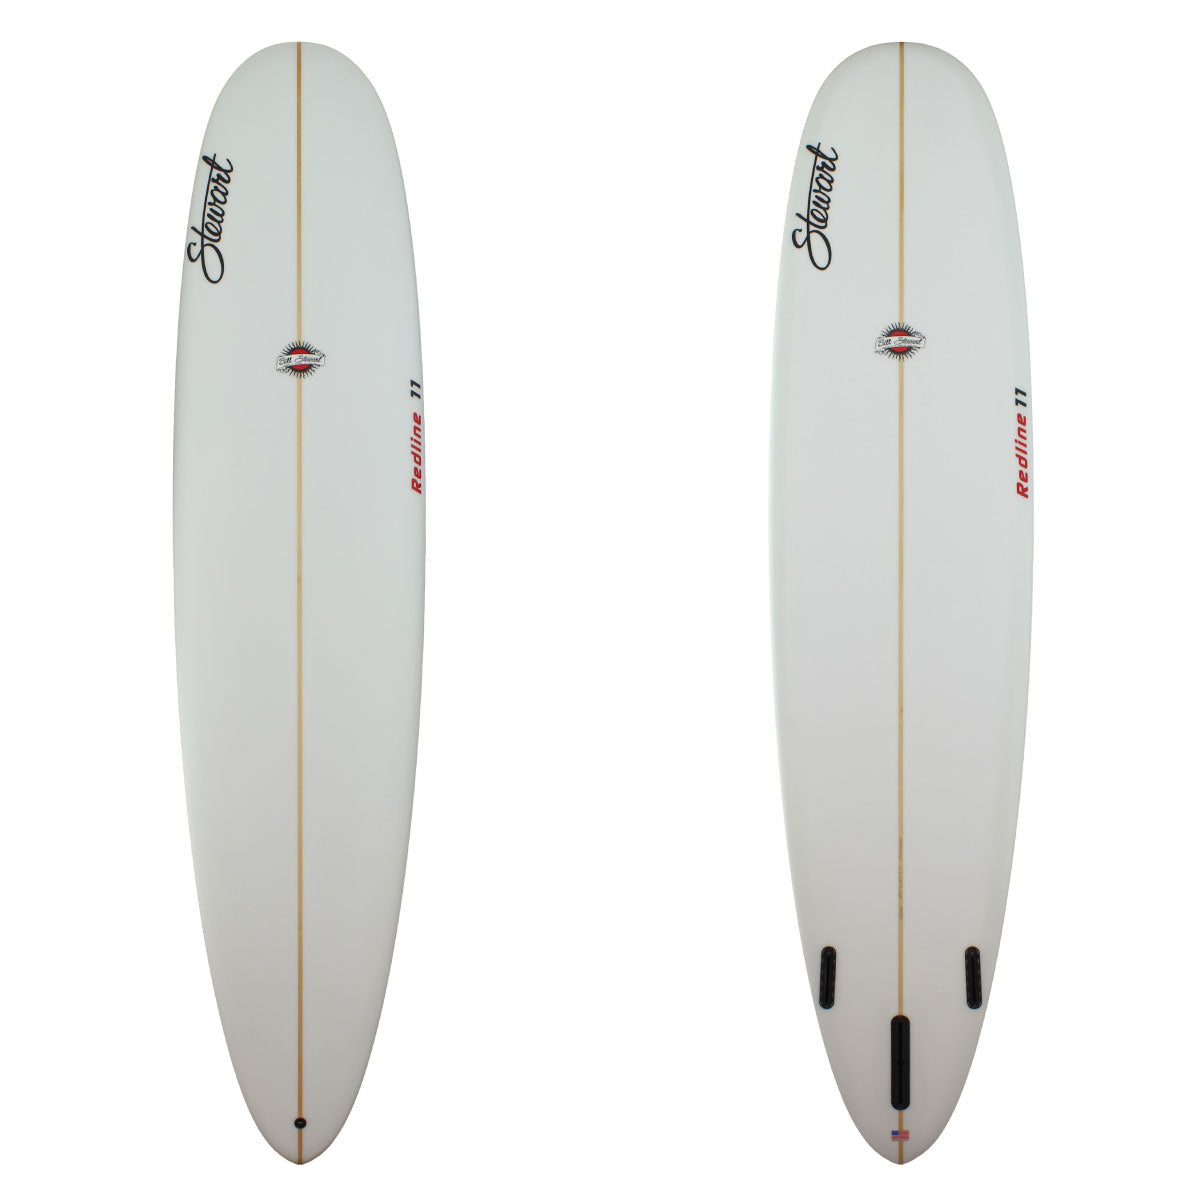 Stewart 9'0" Redline 11 Longboard with clear deck and bottom with red logos (9'0", 23", 3") B#127524